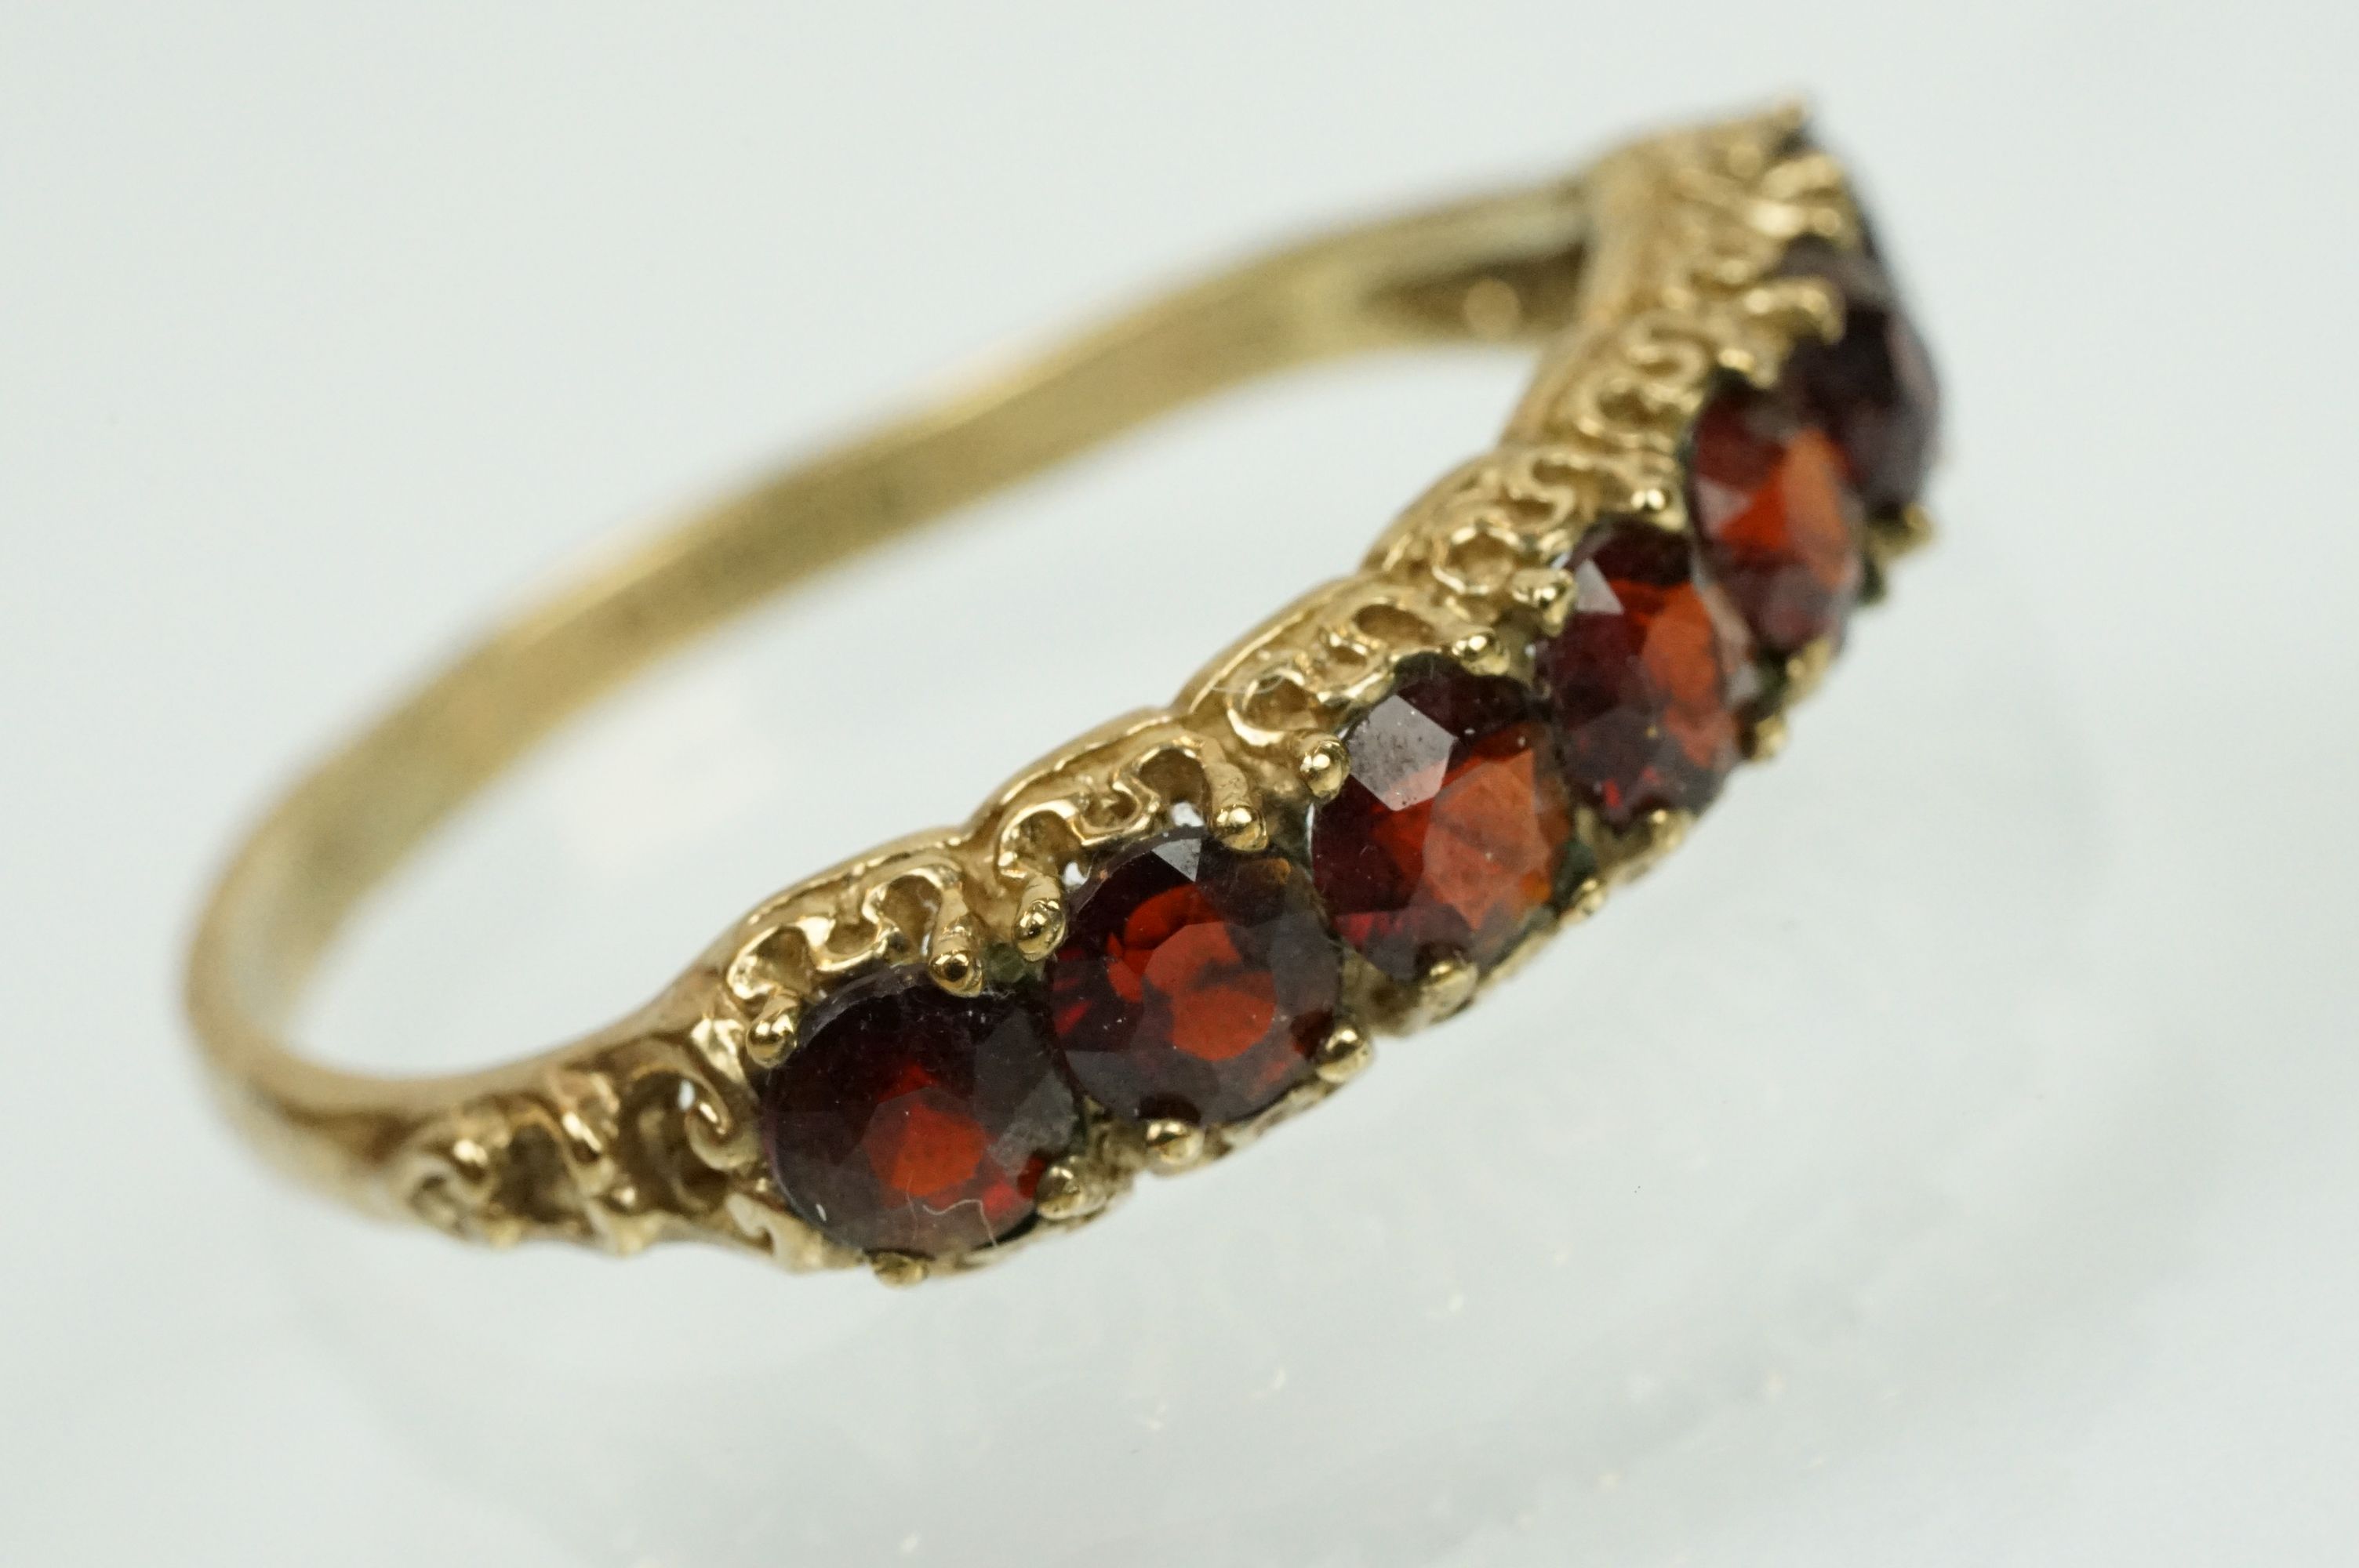 9ct gold and garnet seven stone ring set with seven round cut garnets to a plain shank. Hallmarked